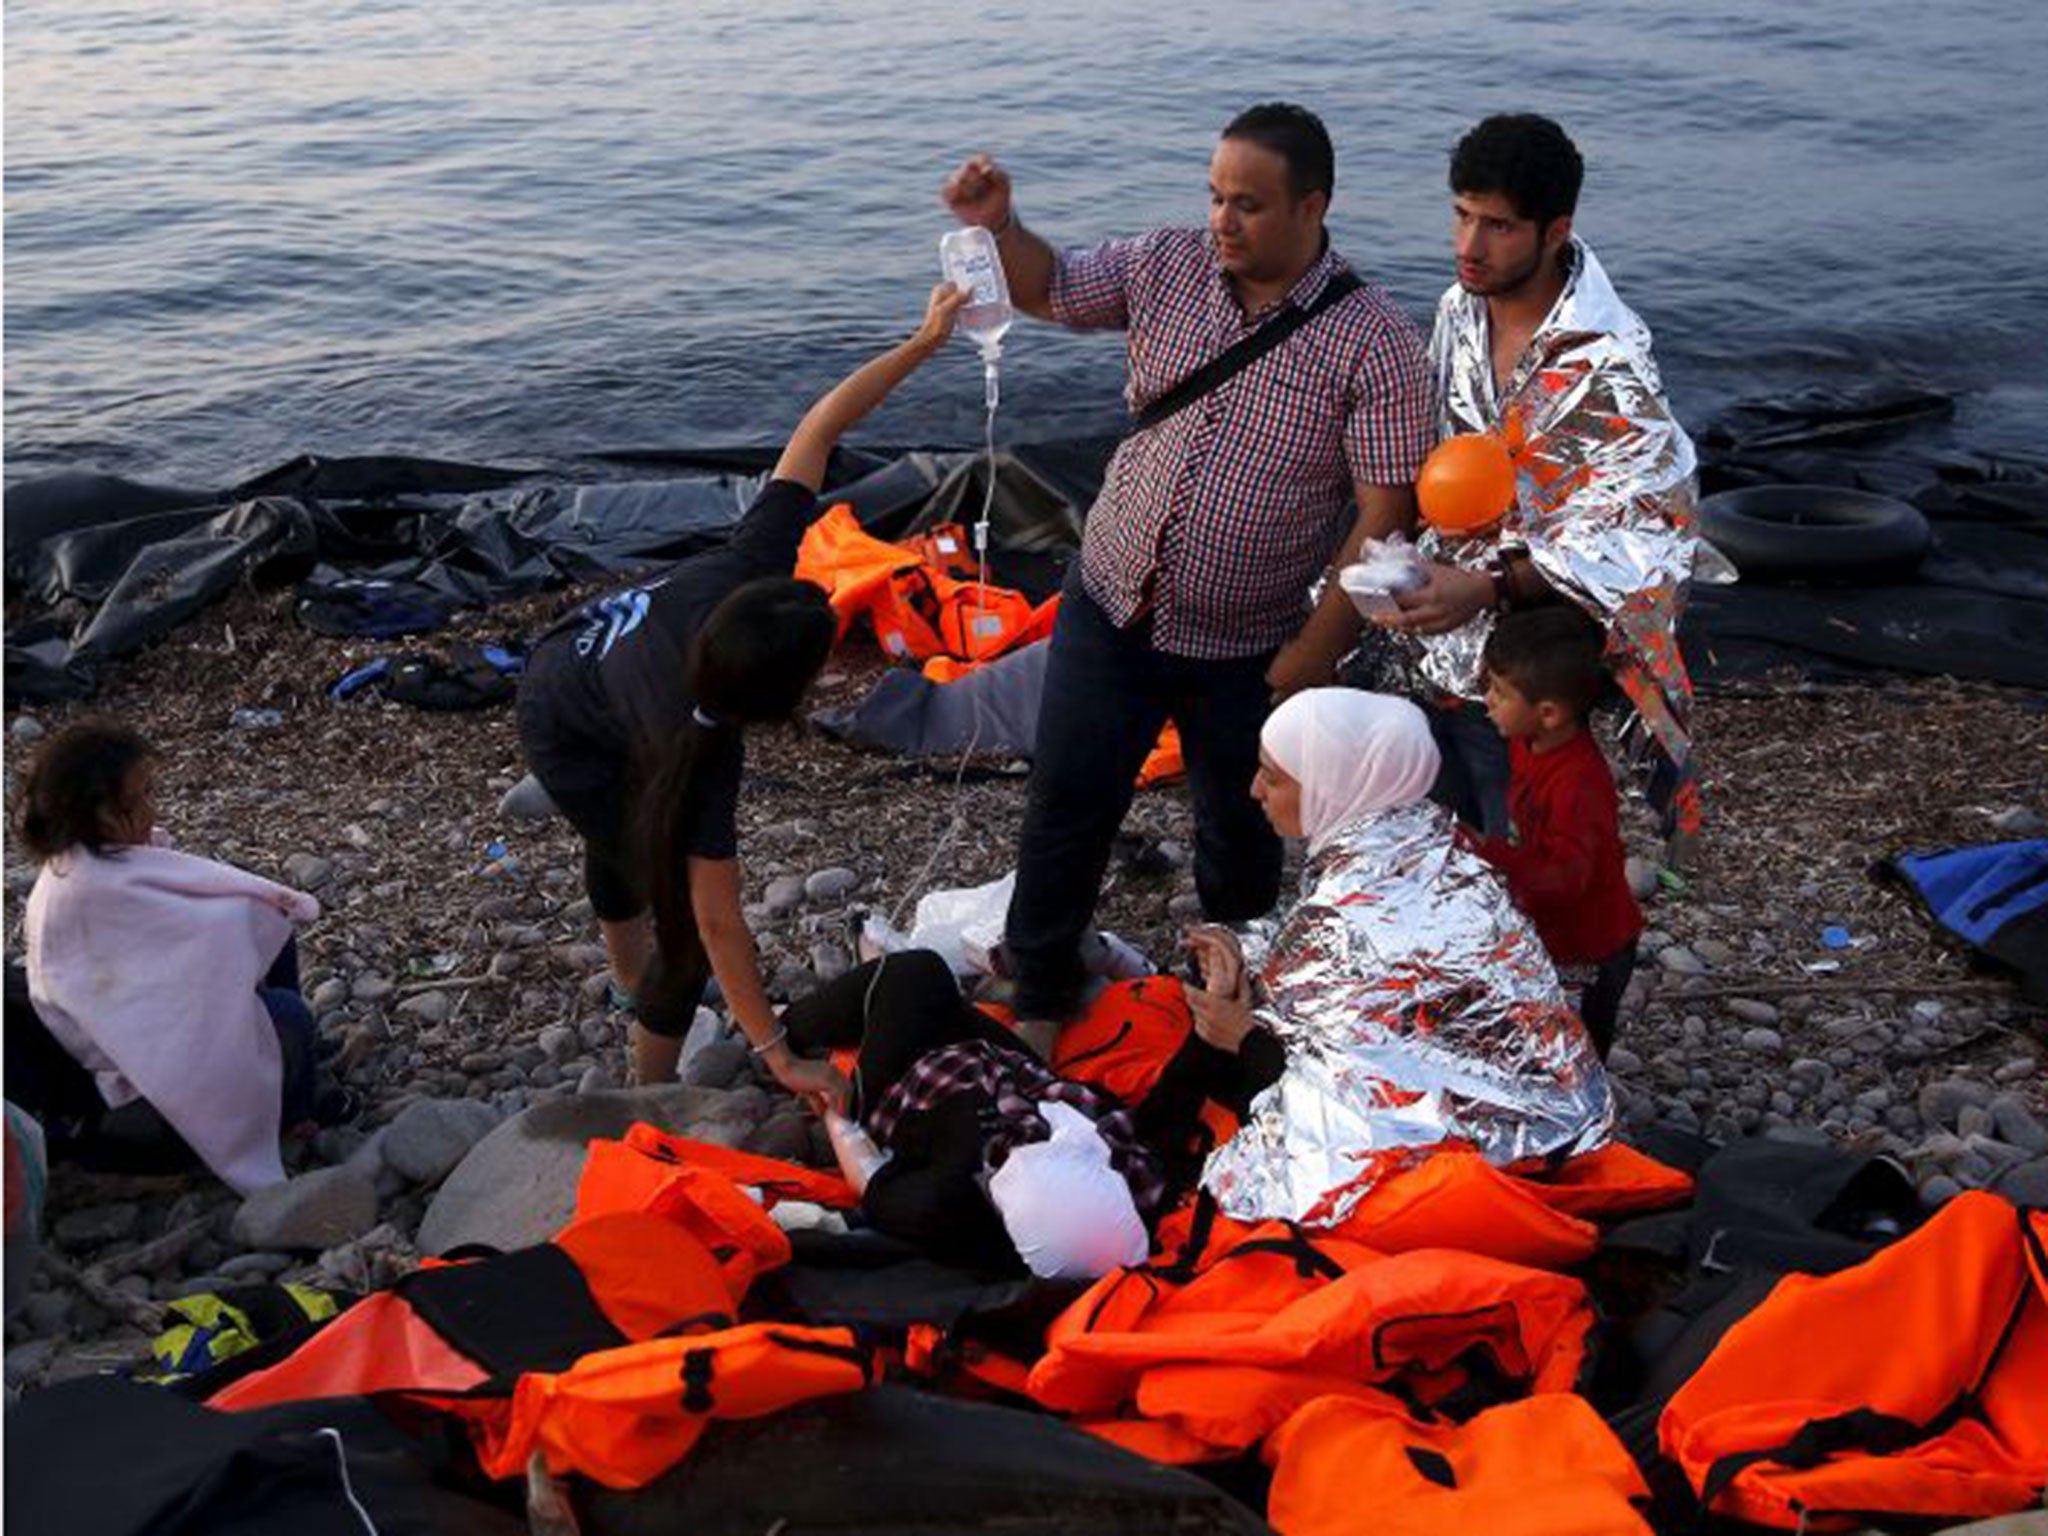 Volunteers provide medical help to a pregnant Syrian refugee woman shortly after she arrived on Lesbos (Reuters)